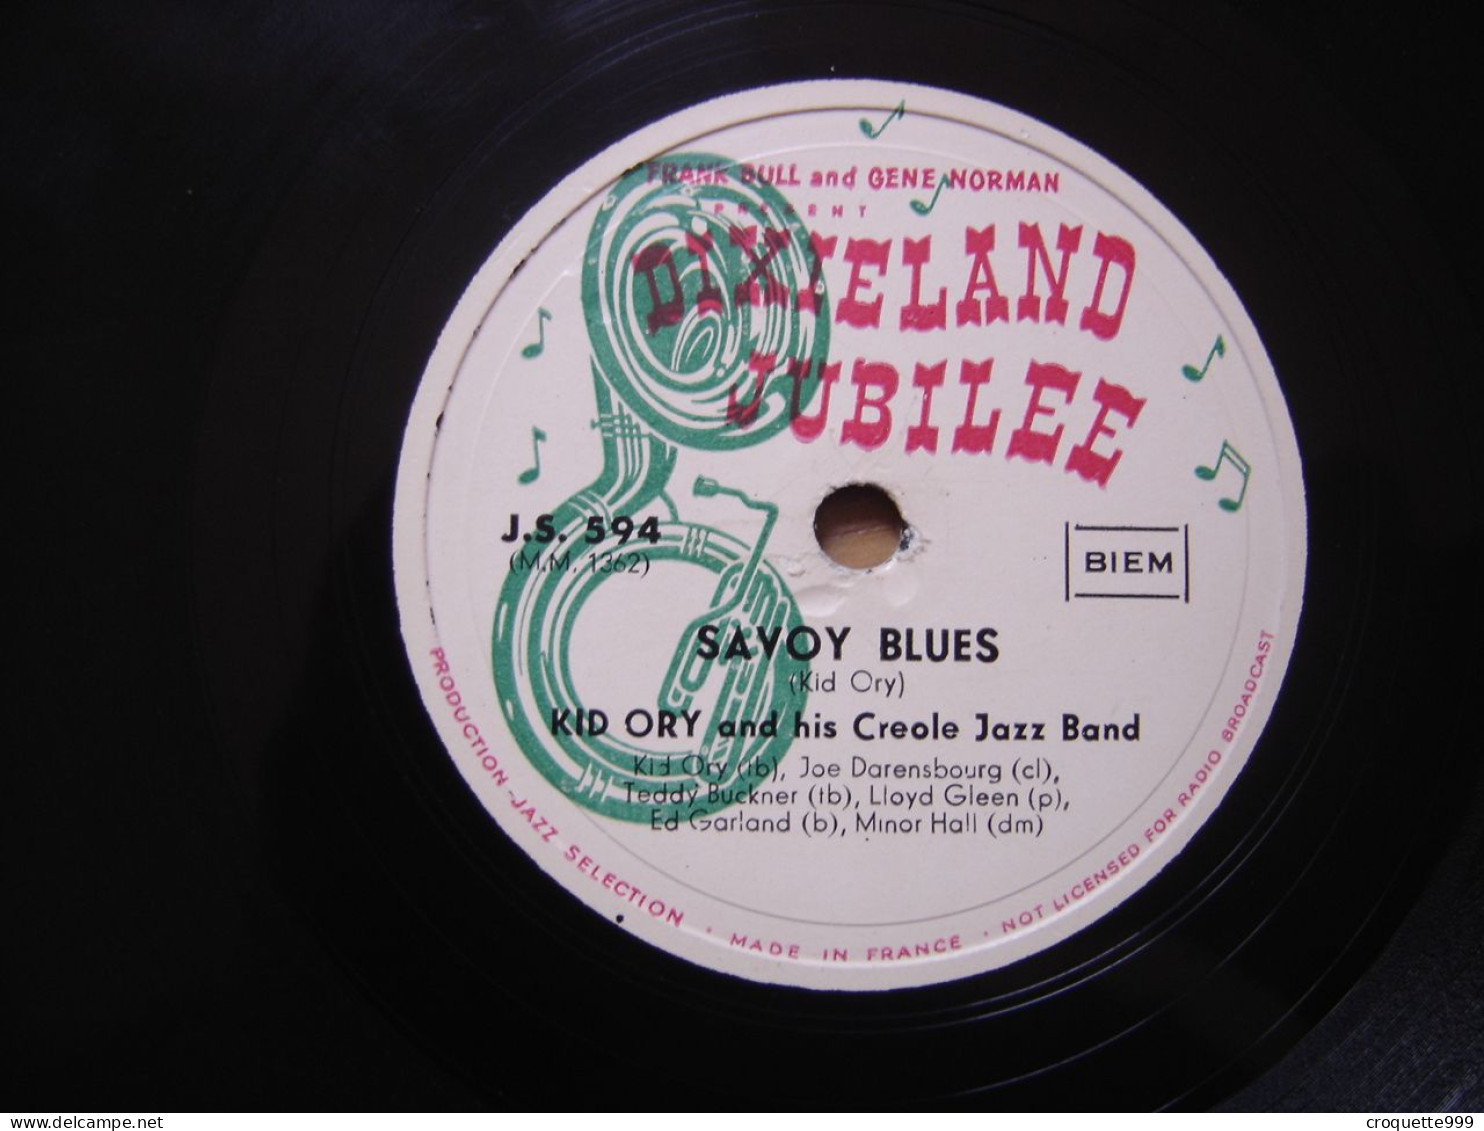 Disque 78 Tours 25 Cm KID ORY And His Creole Jazz Band Dixieland Jubilee J.S. 594 12th STREET RAG SAVOY - 78 T - Disques Pour Gramophone